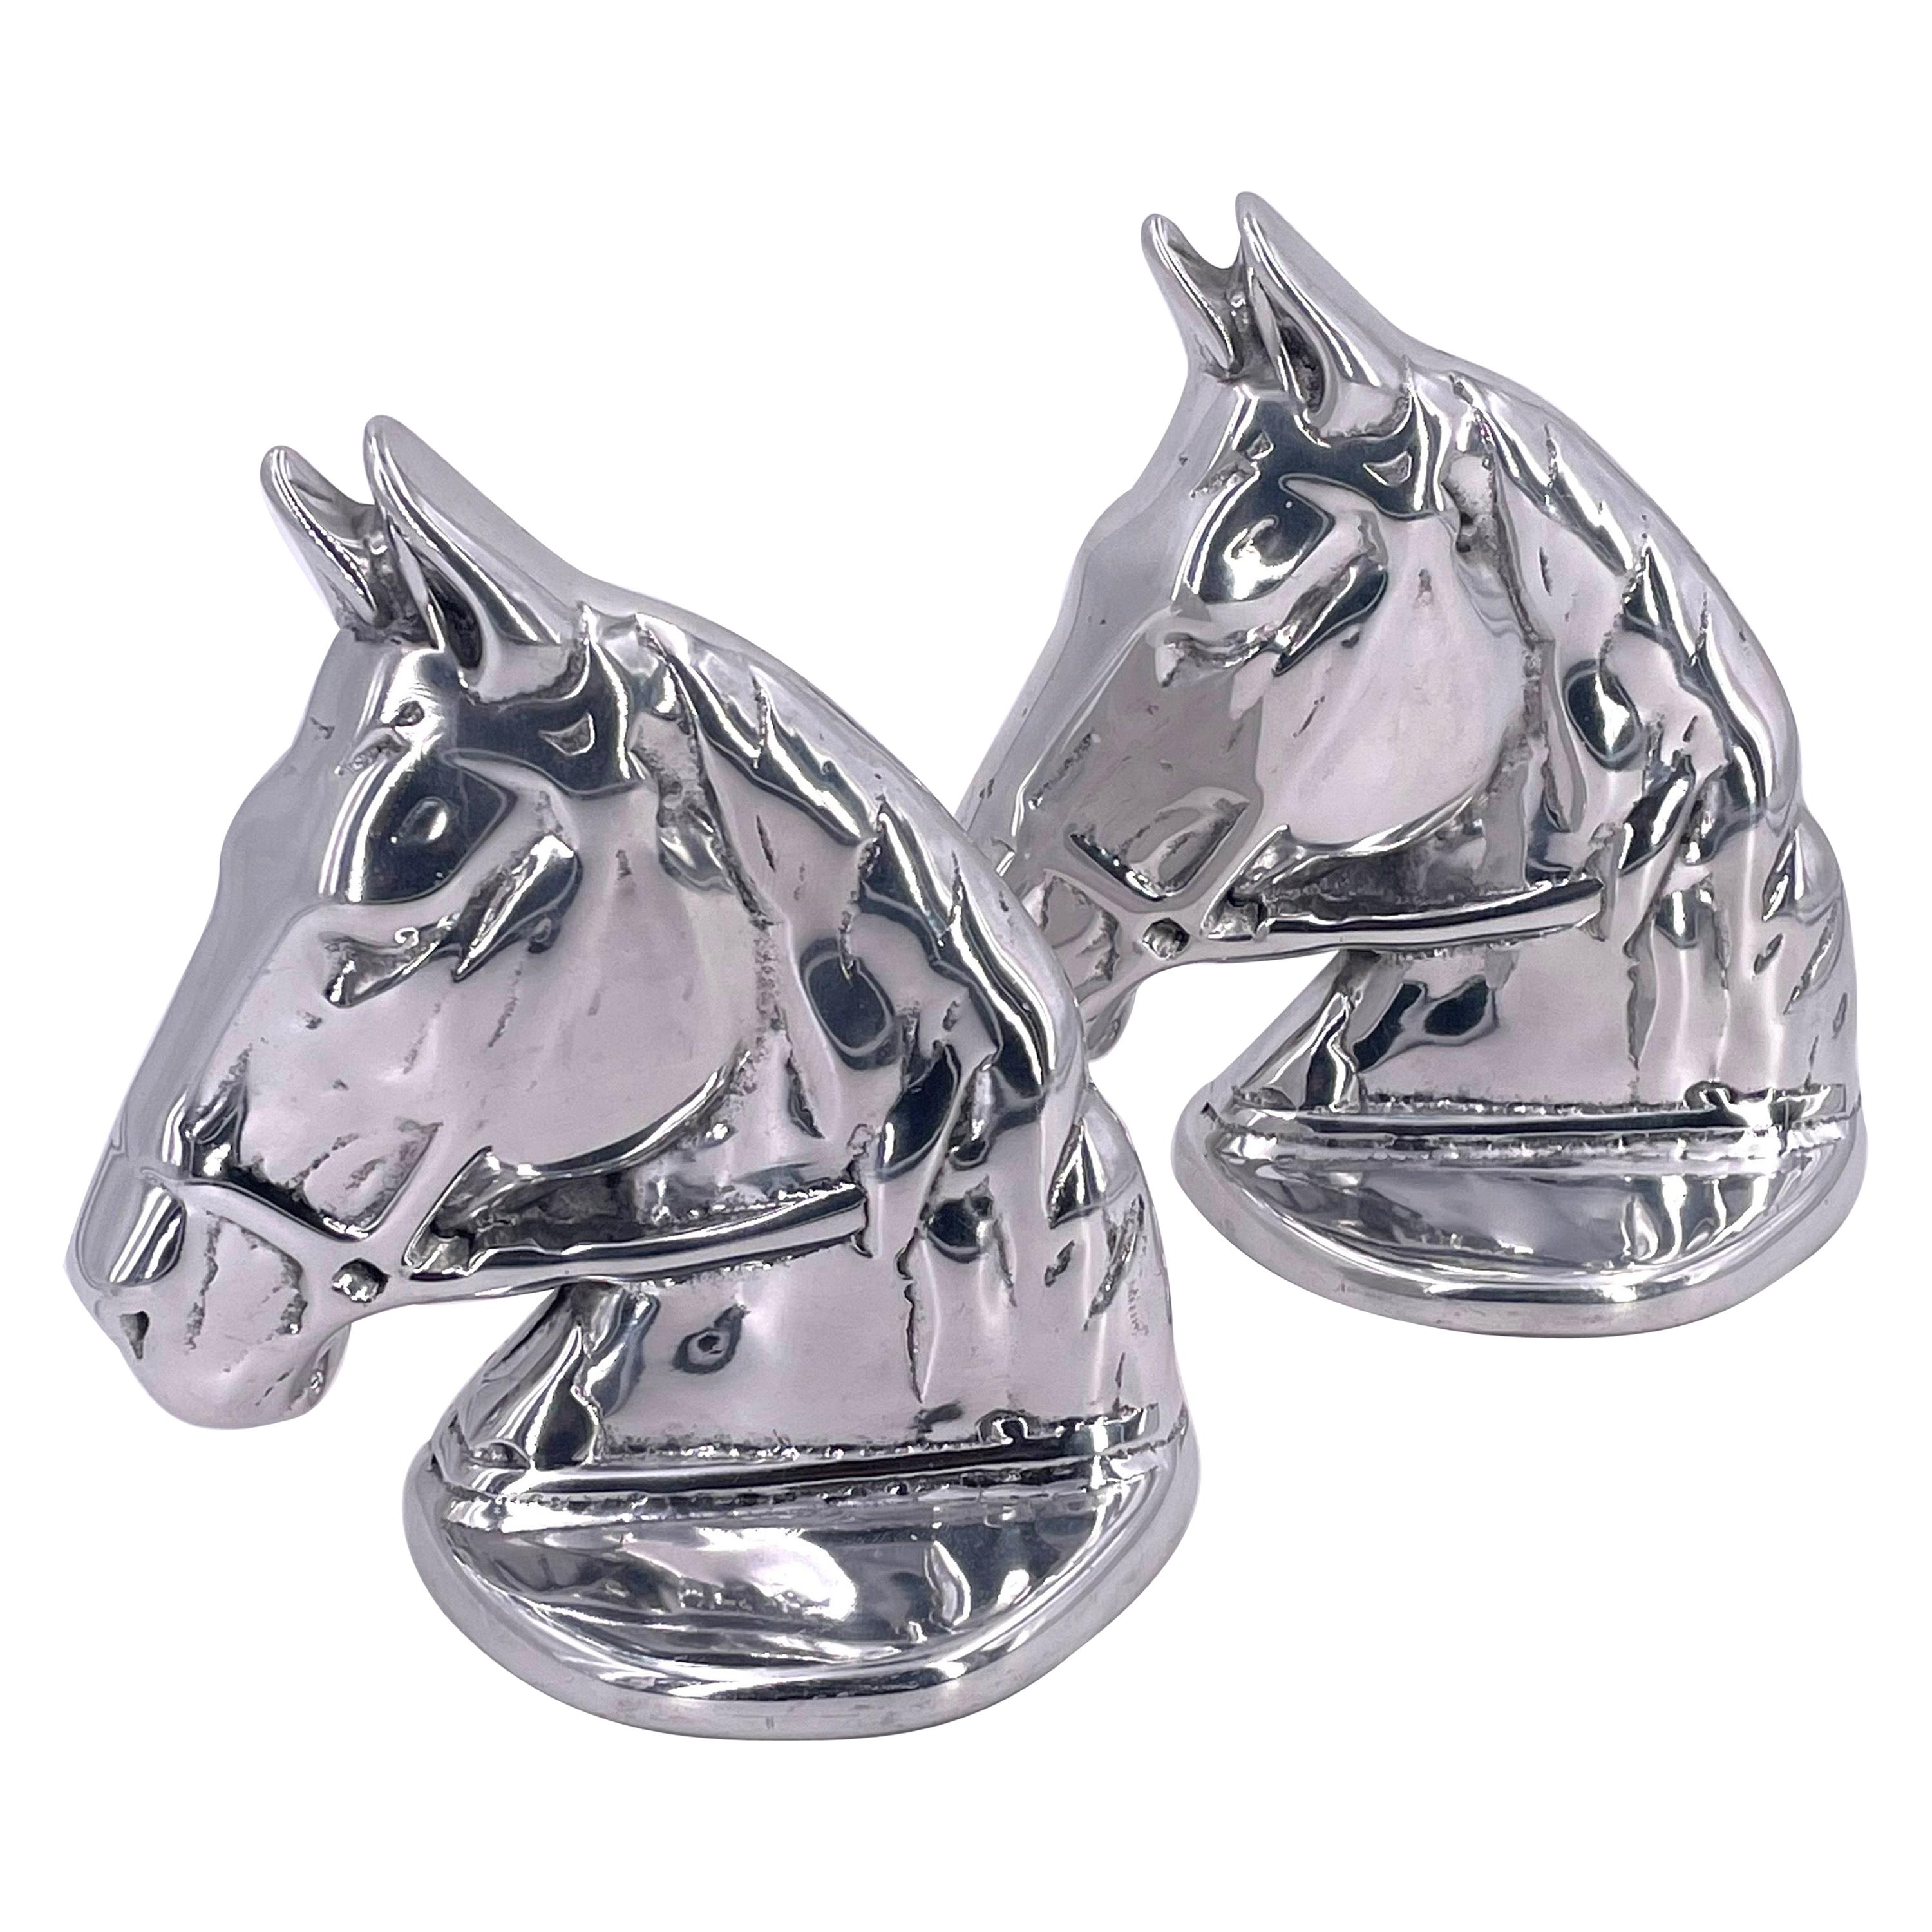 Polished Aluminum Rare Horse Sculptures by Hoselton Signed